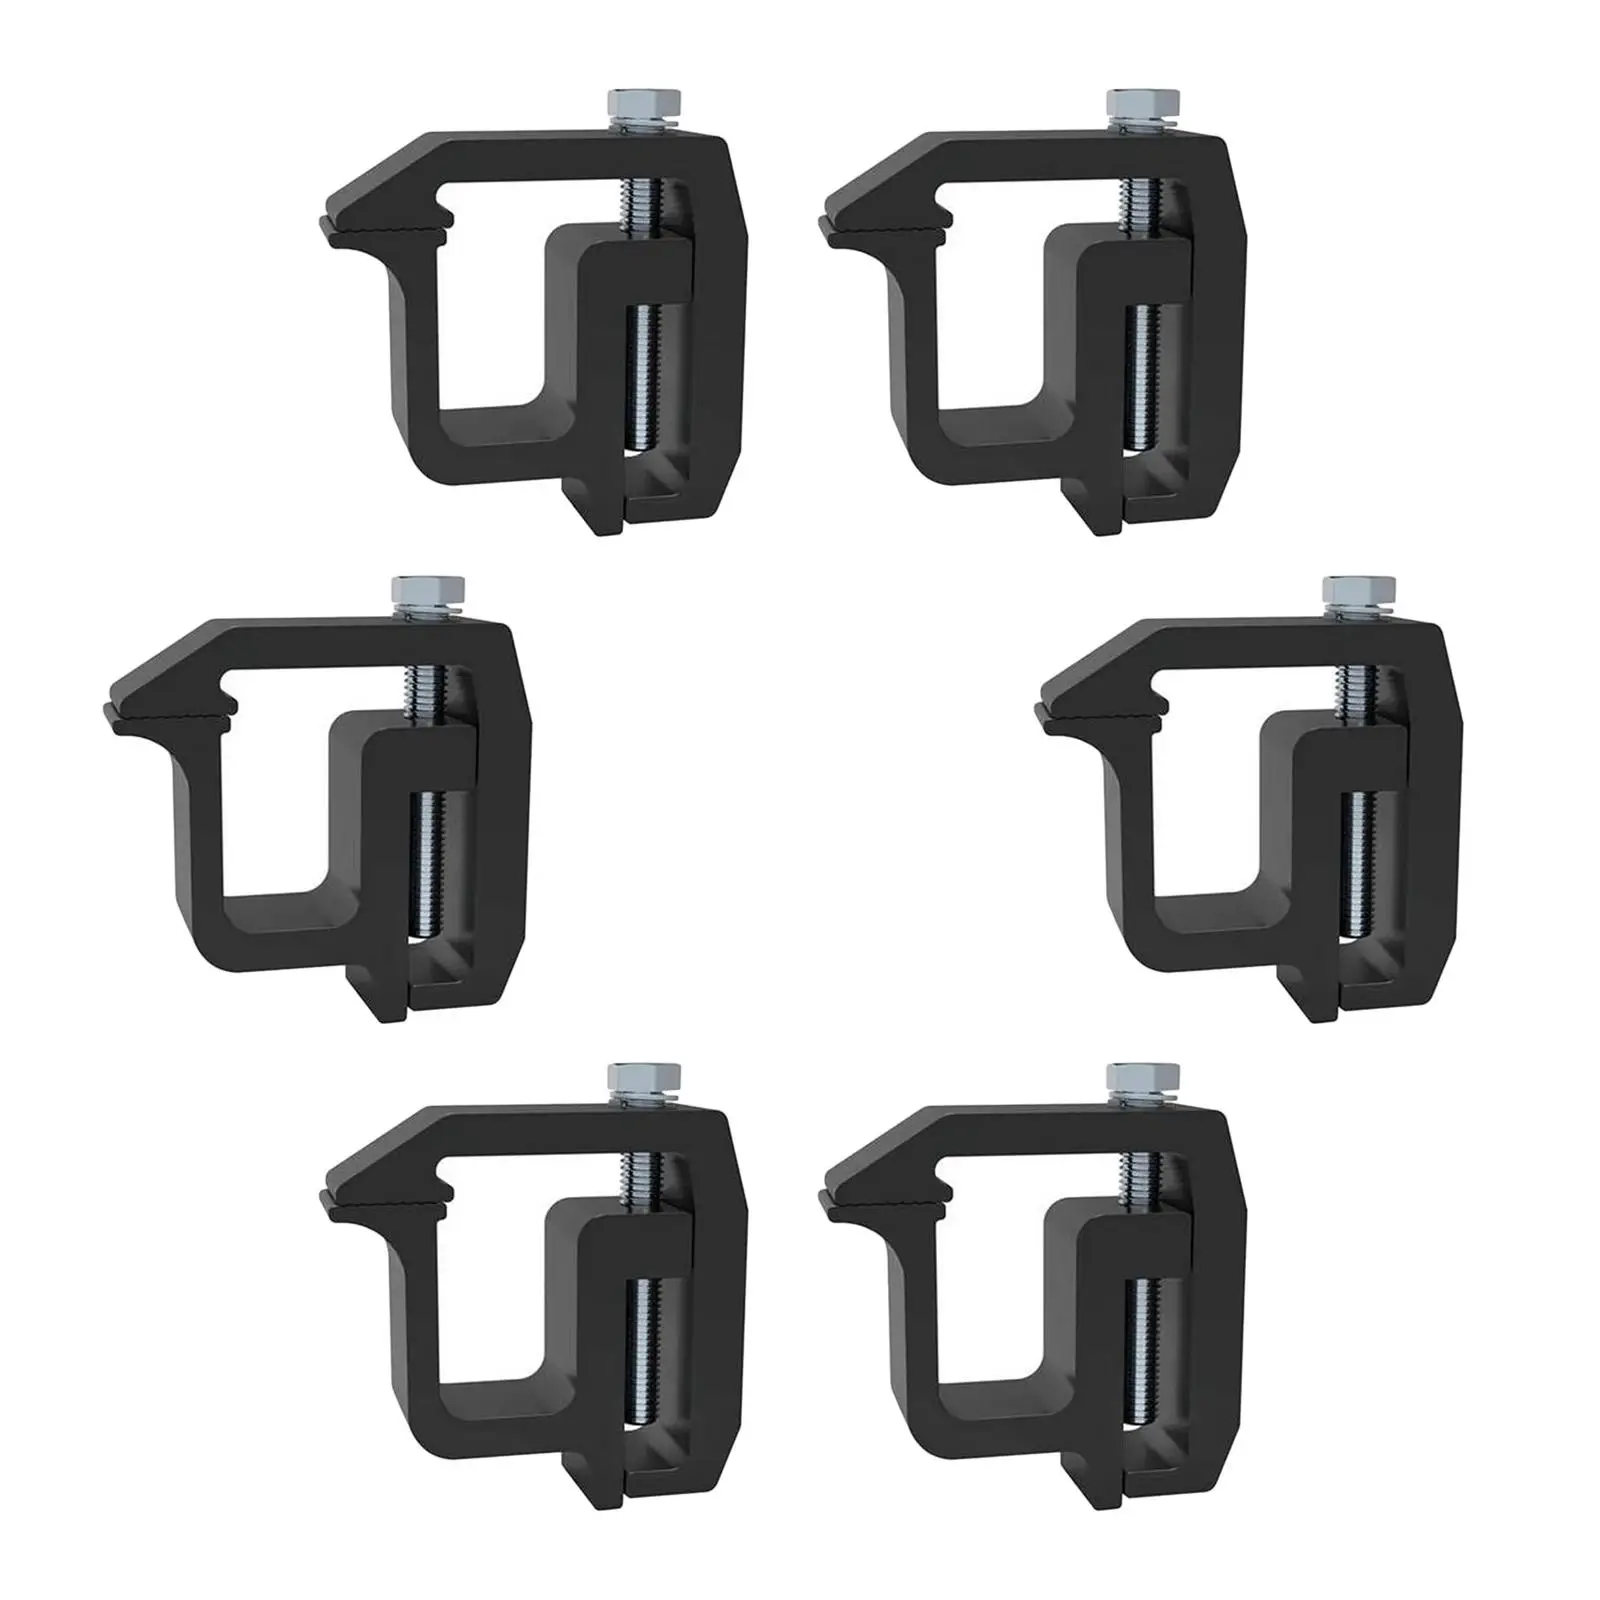 Mounting Clamps Heavy Duty for Chevy Sierra 1500 25003500 for Topper Camper Shell Truck Bed Accessories Vehicle Parts Black